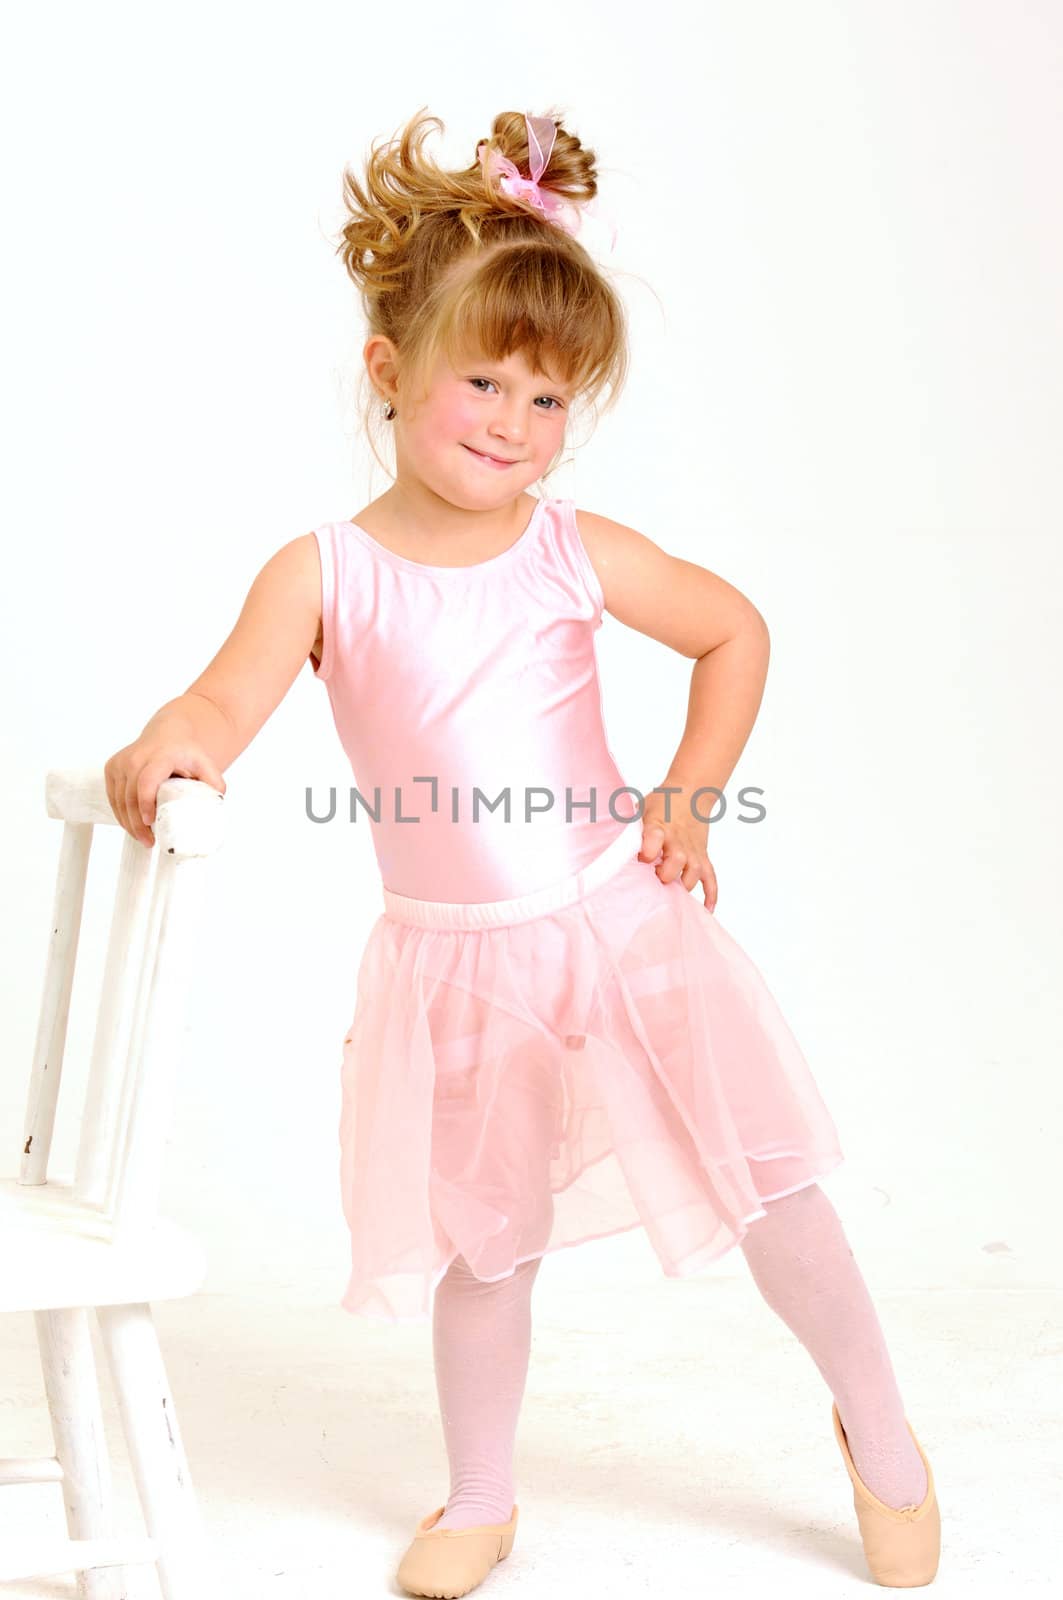 Little smiley girl wearing a pink ballet outfit is dancing holding her dress